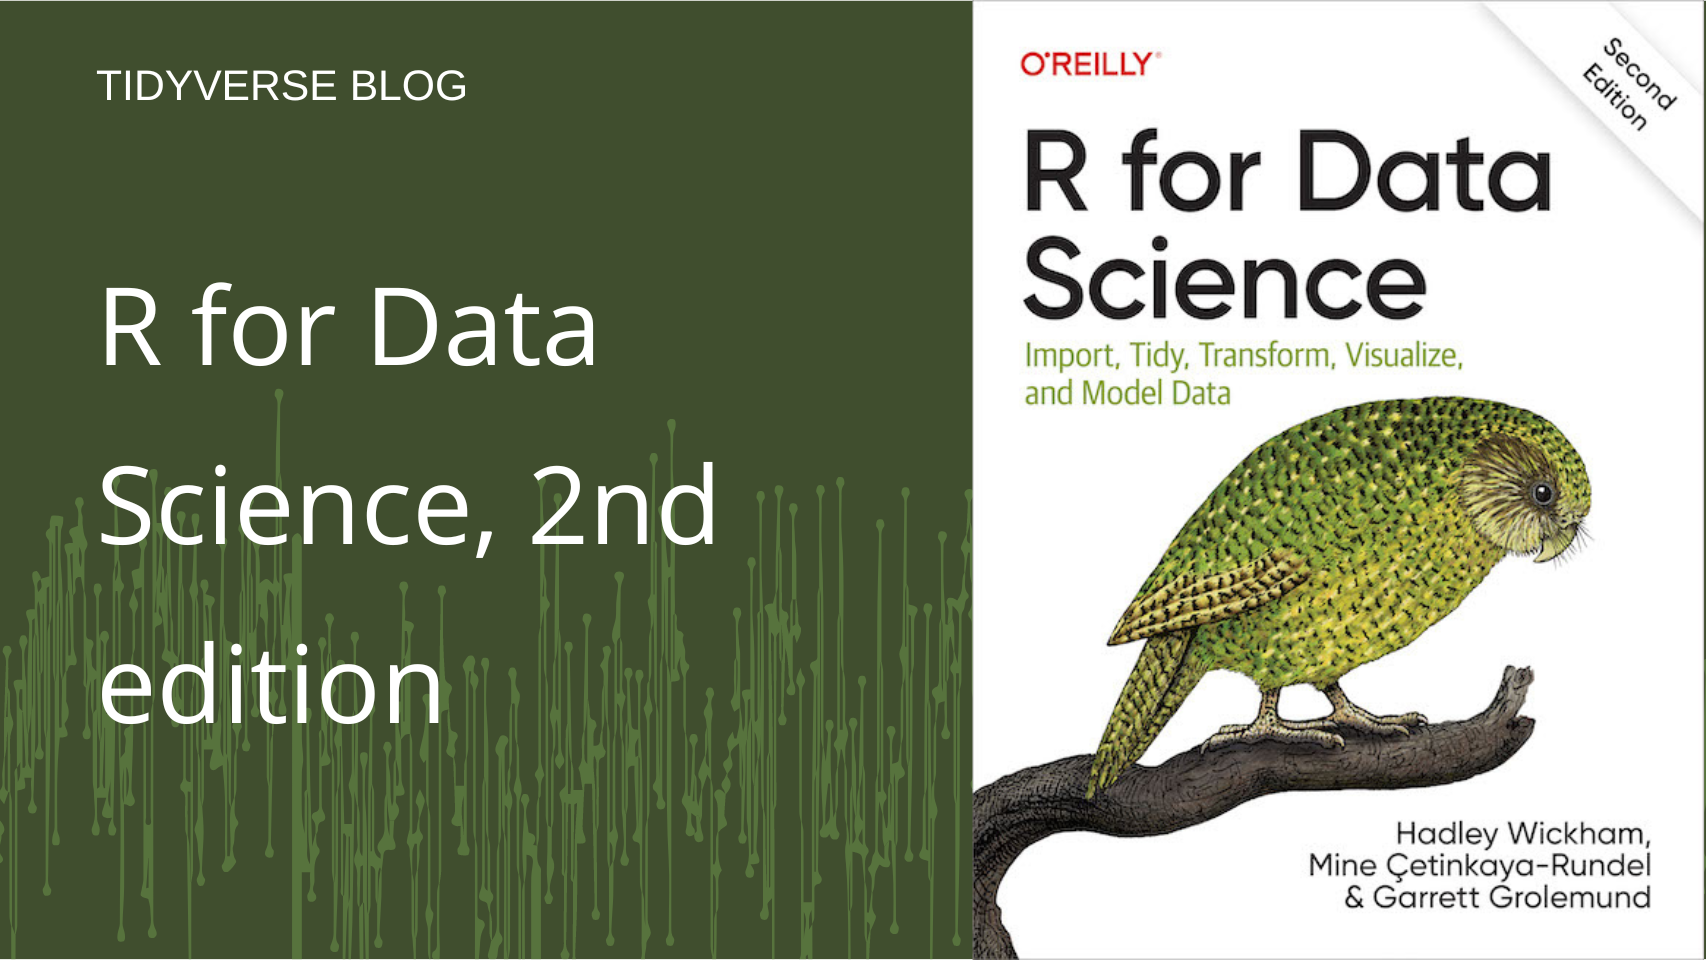 Text: "Tidyverse Blog, R for Data Science, 2nd edition." On the right, the cover of the book. It reads: "R for Data Science: Import, Tidy, Transform, Visualize, and Model Data. O'Reilly book, second edition, by Hadley Wickham, Mine Cetinkaya-Rundel, and Garrett Grolemund." It also contains an image of the kākāpō, a critically endangered parrot native to New Zealand.